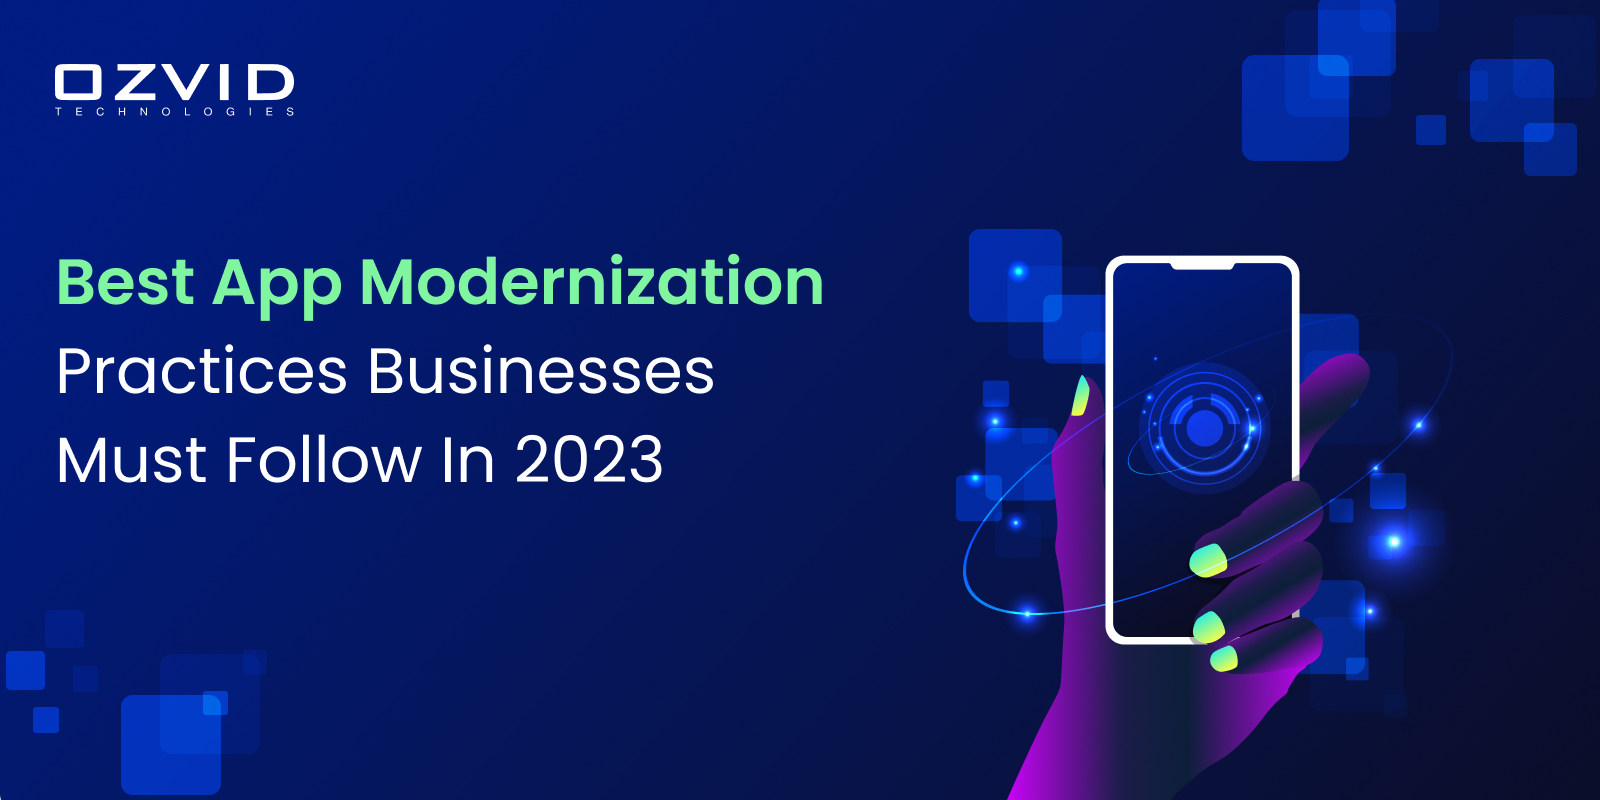 The Best App Modernization Practices Businesses Must Follow In 2023